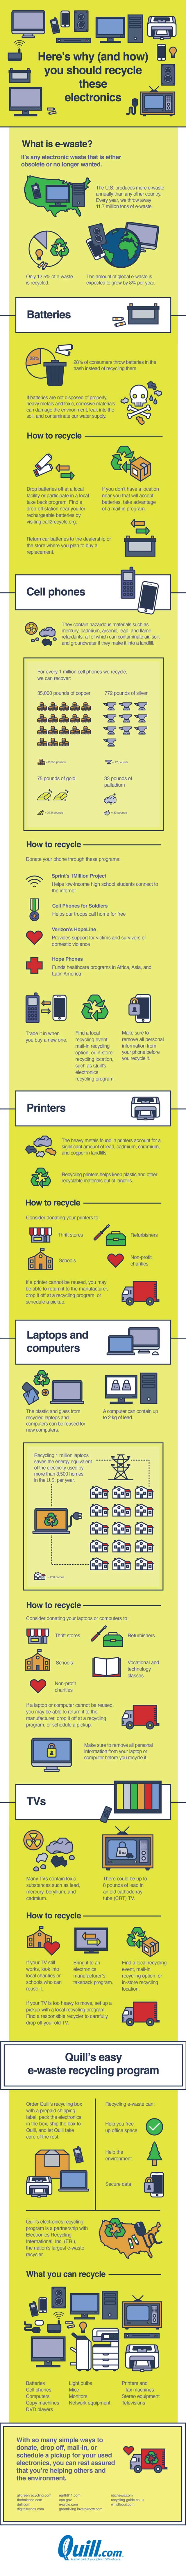 How to Recycle Electronics [Infographic] | ecogreenlove